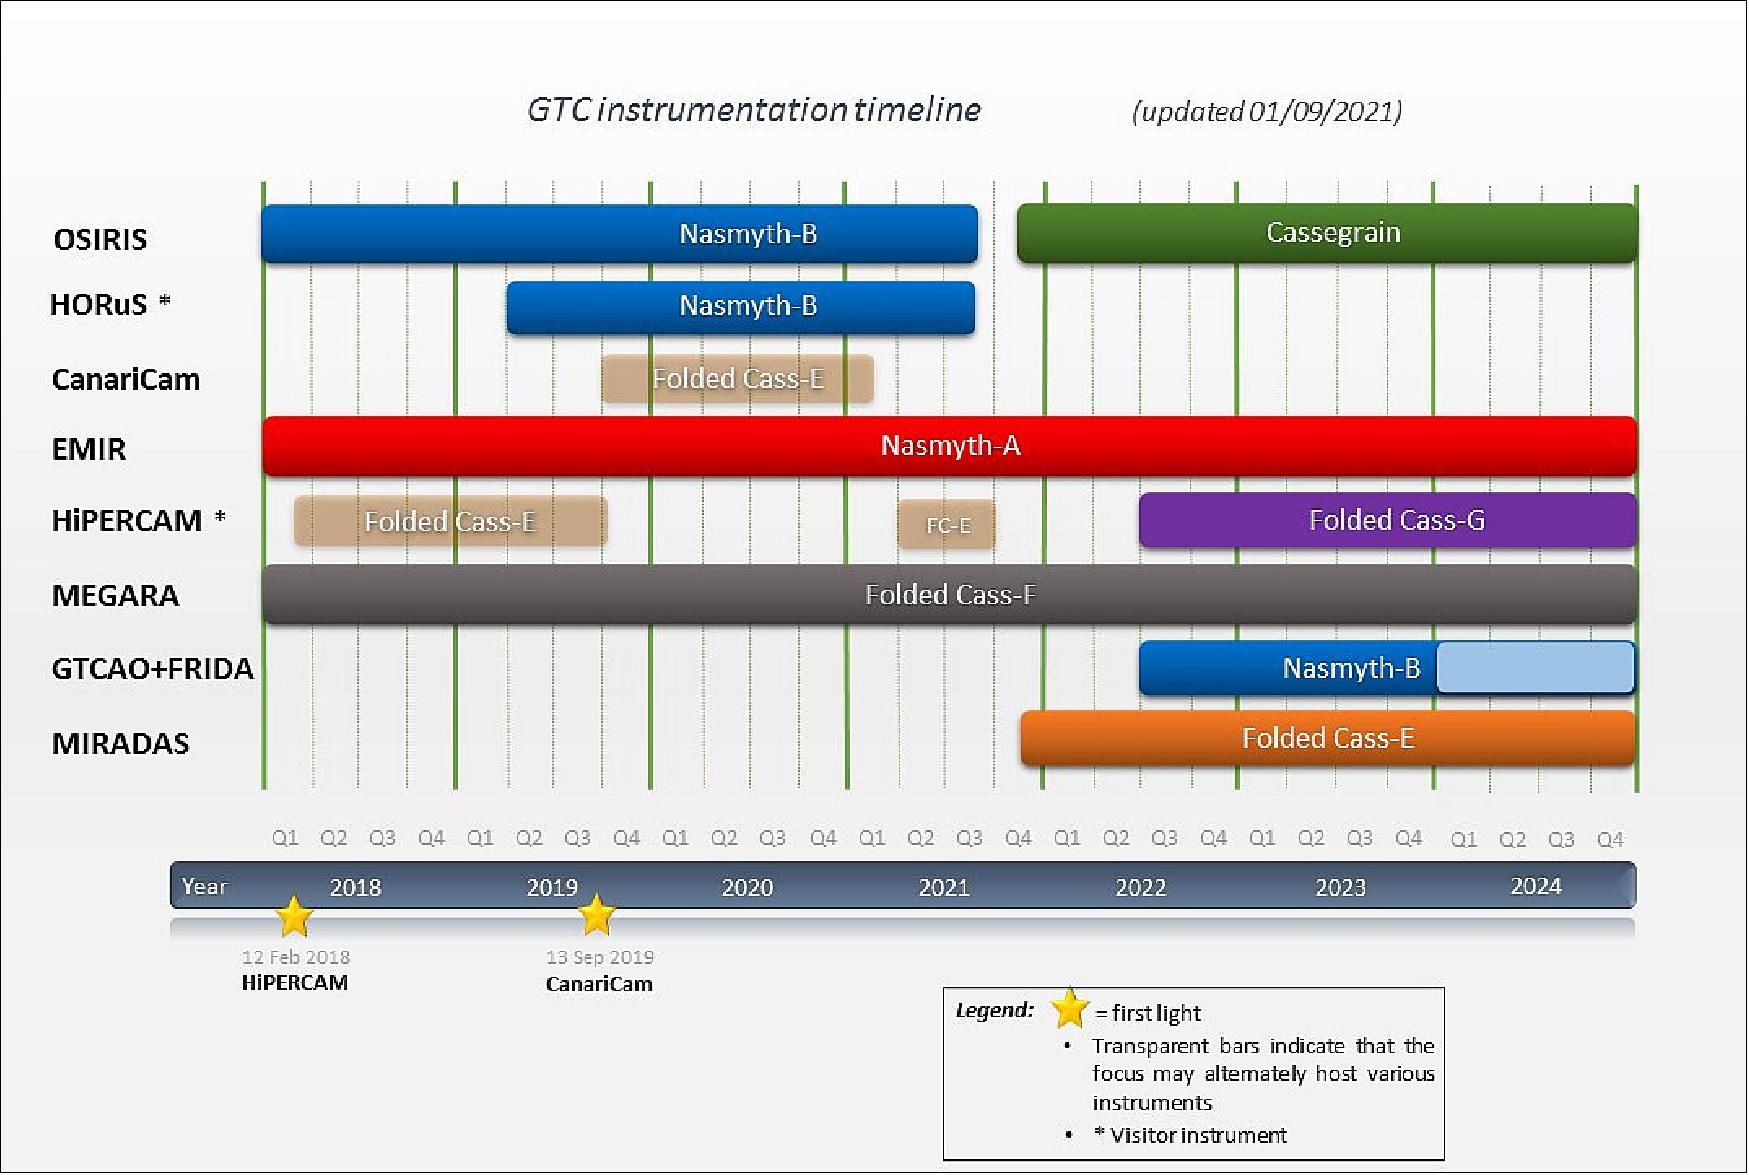 Figure 32: Current timeline for GTC instruments in the period 2018-2024 (image credit: IAC)